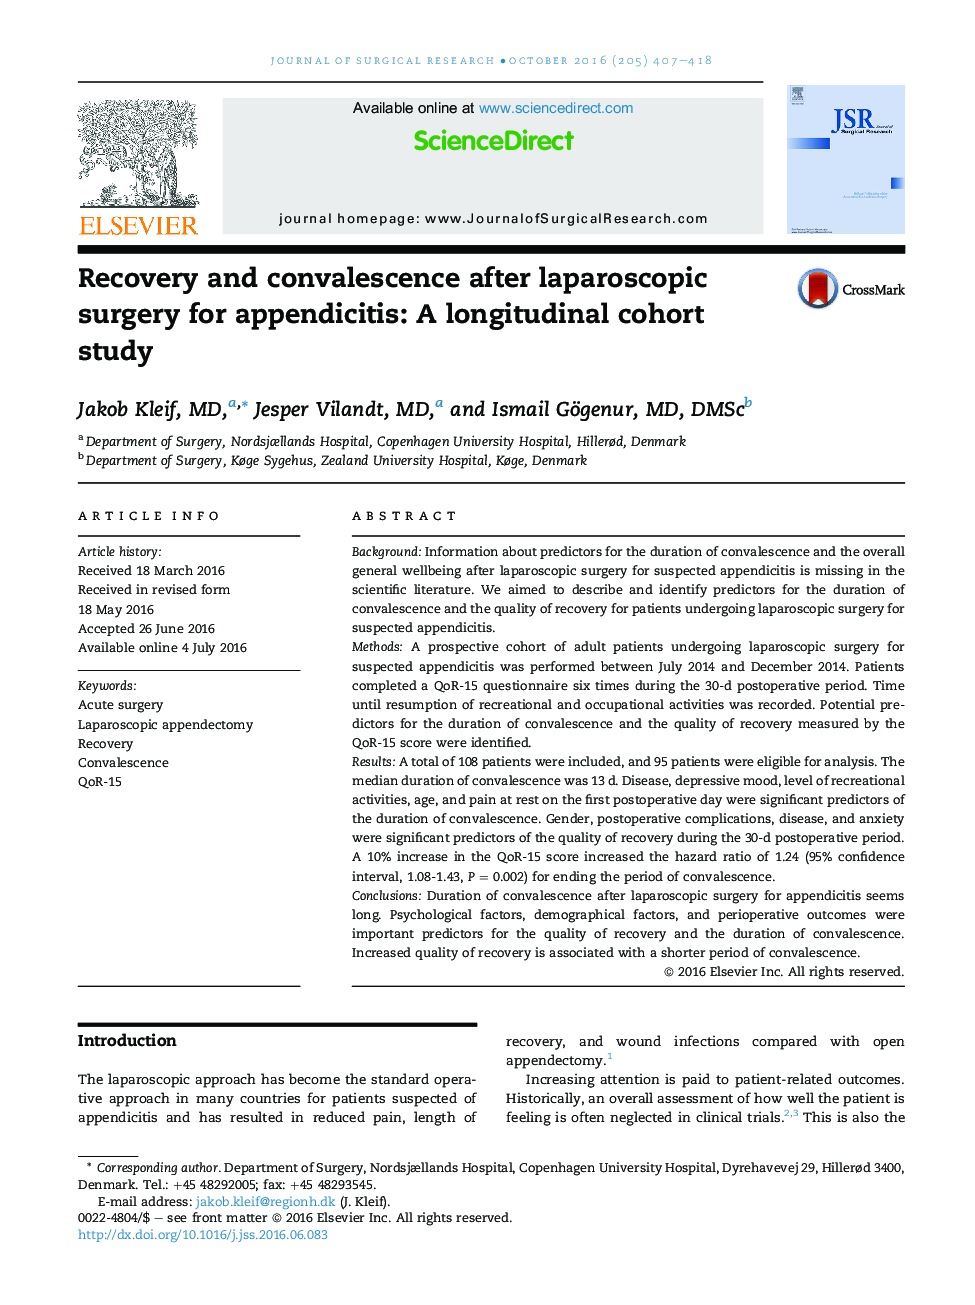 Recovery and convalescence after laparoscopic surgery for appendicitis: A longitudinal cohort study